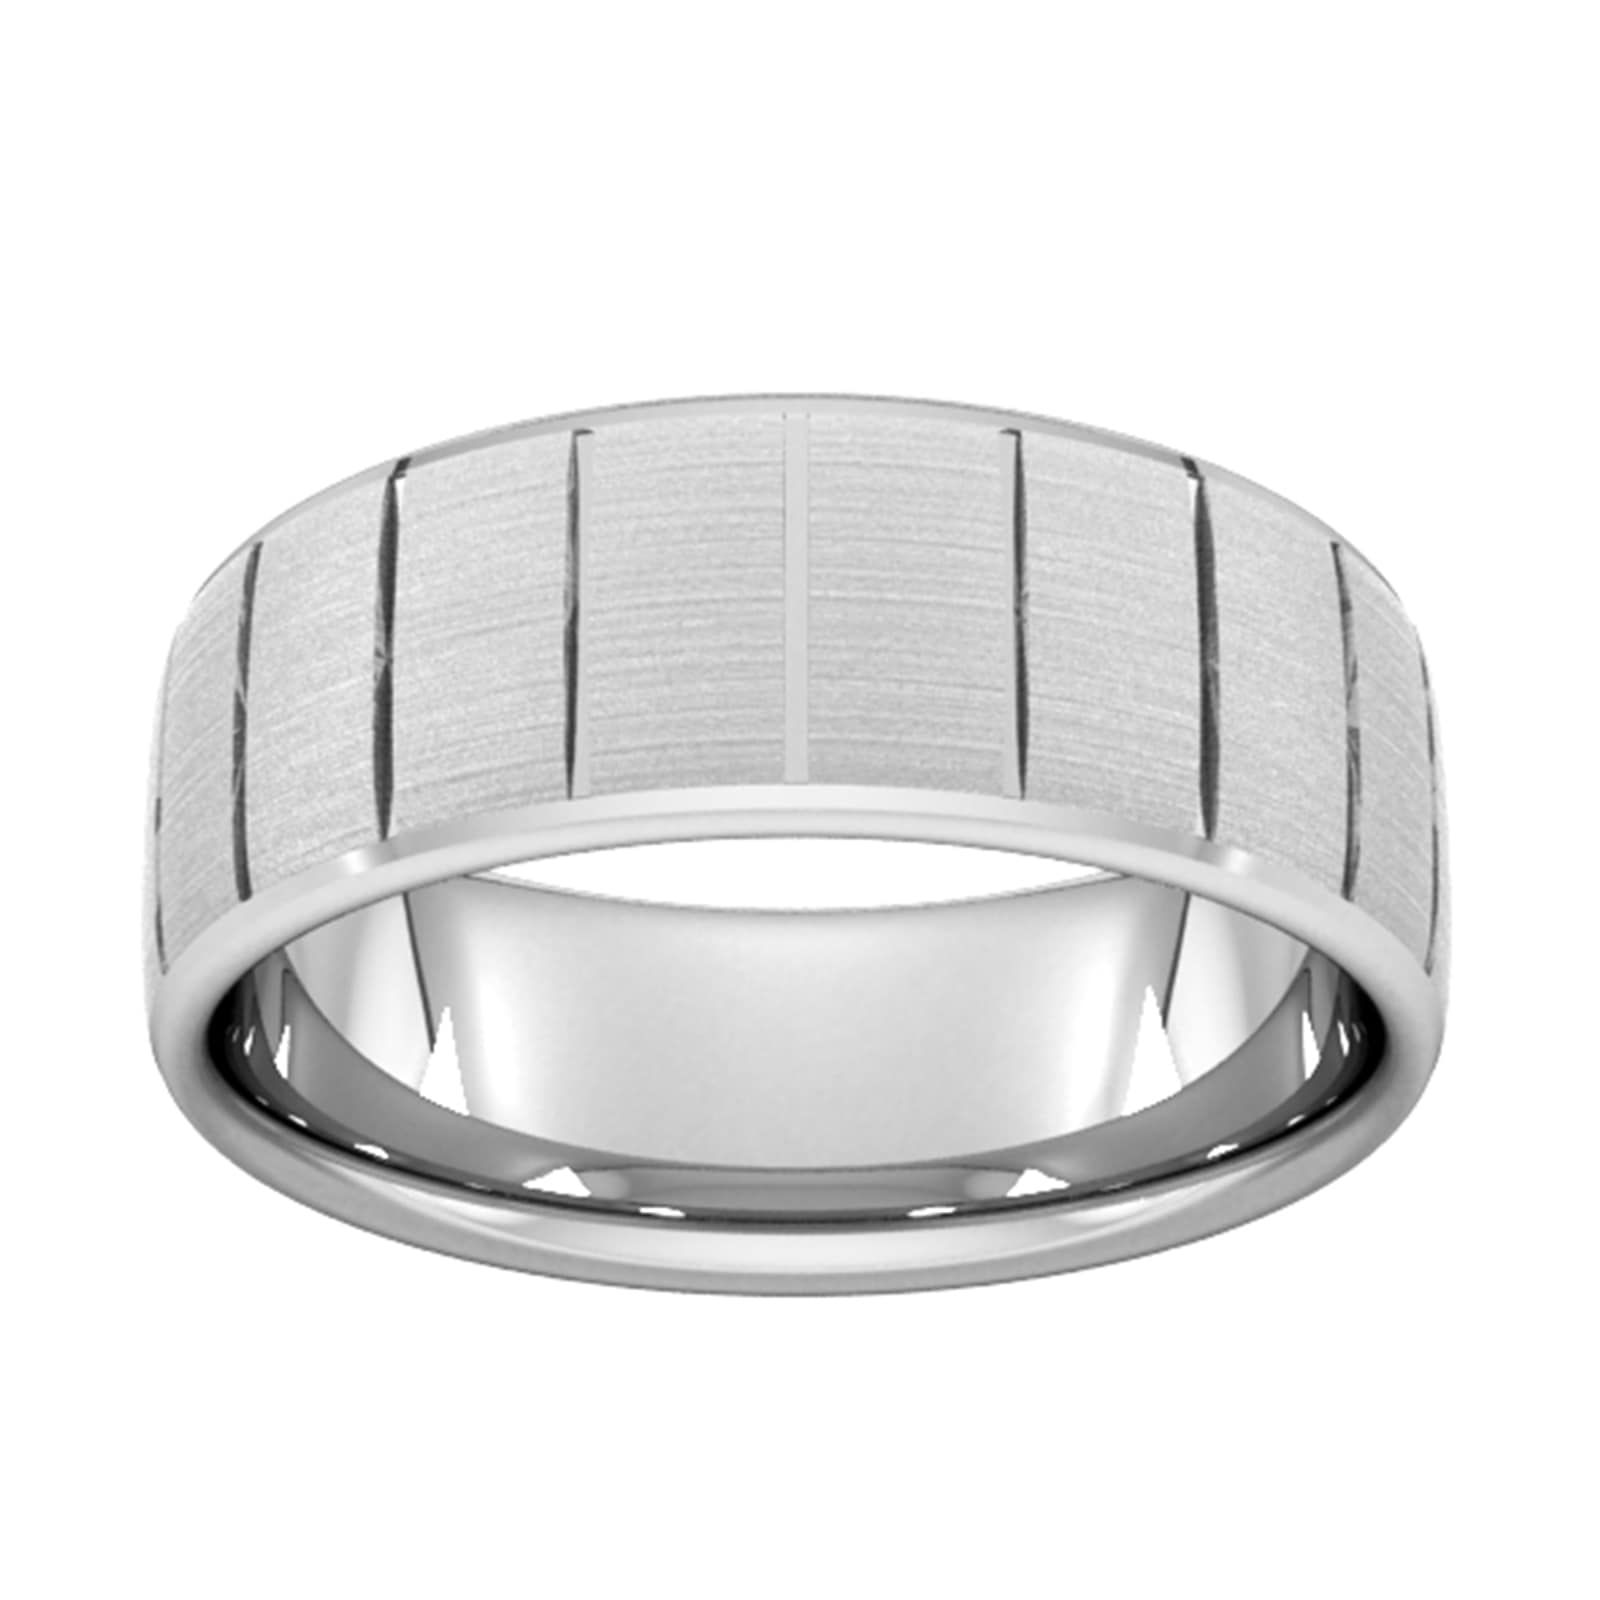 8mm Slight Court Extra Heavy Vertical Lines Wedding Ring In 18 Carat White Gold - Ring Size L